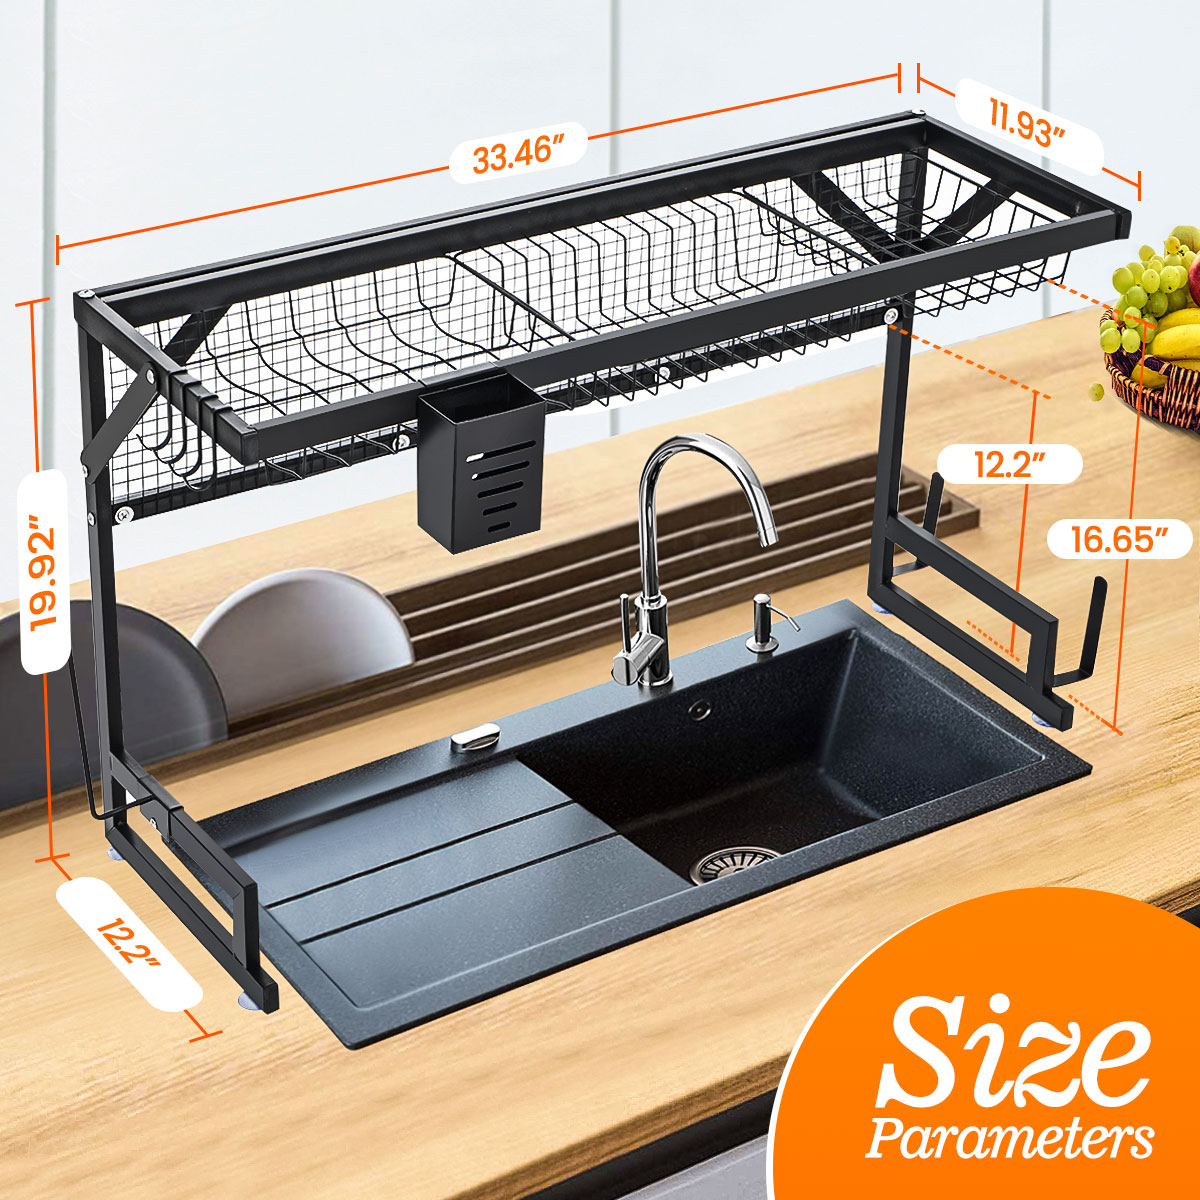 TOOCA Dish Drying Rack Over the Sink Large Dish Rack with Utility Hooks for Ki